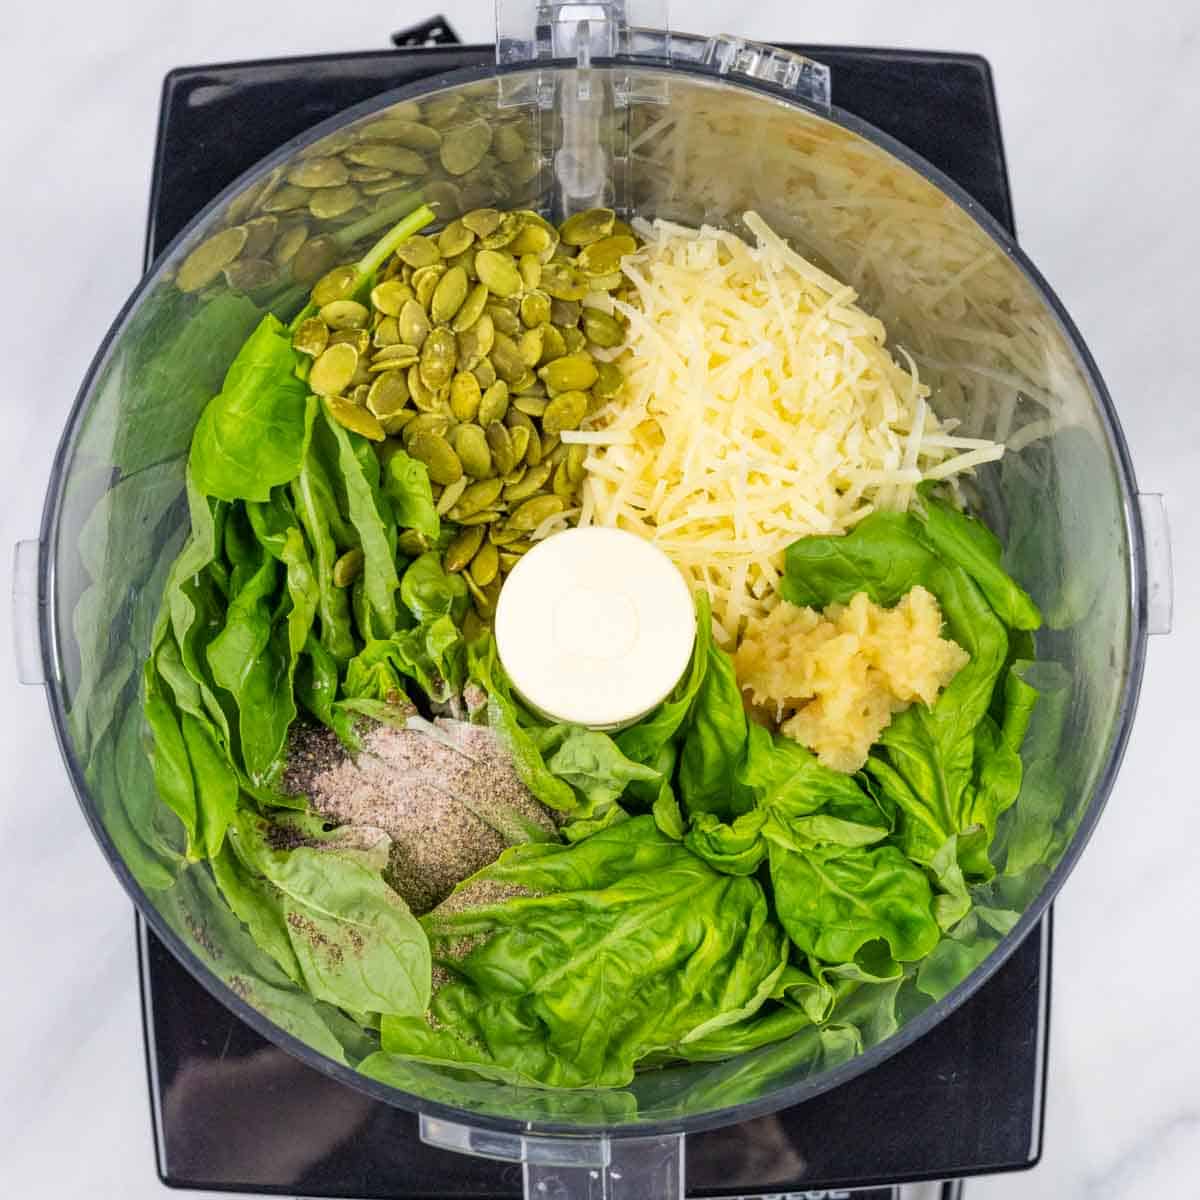 View into bowl of food processor of pesto ingredients in piles before blending.